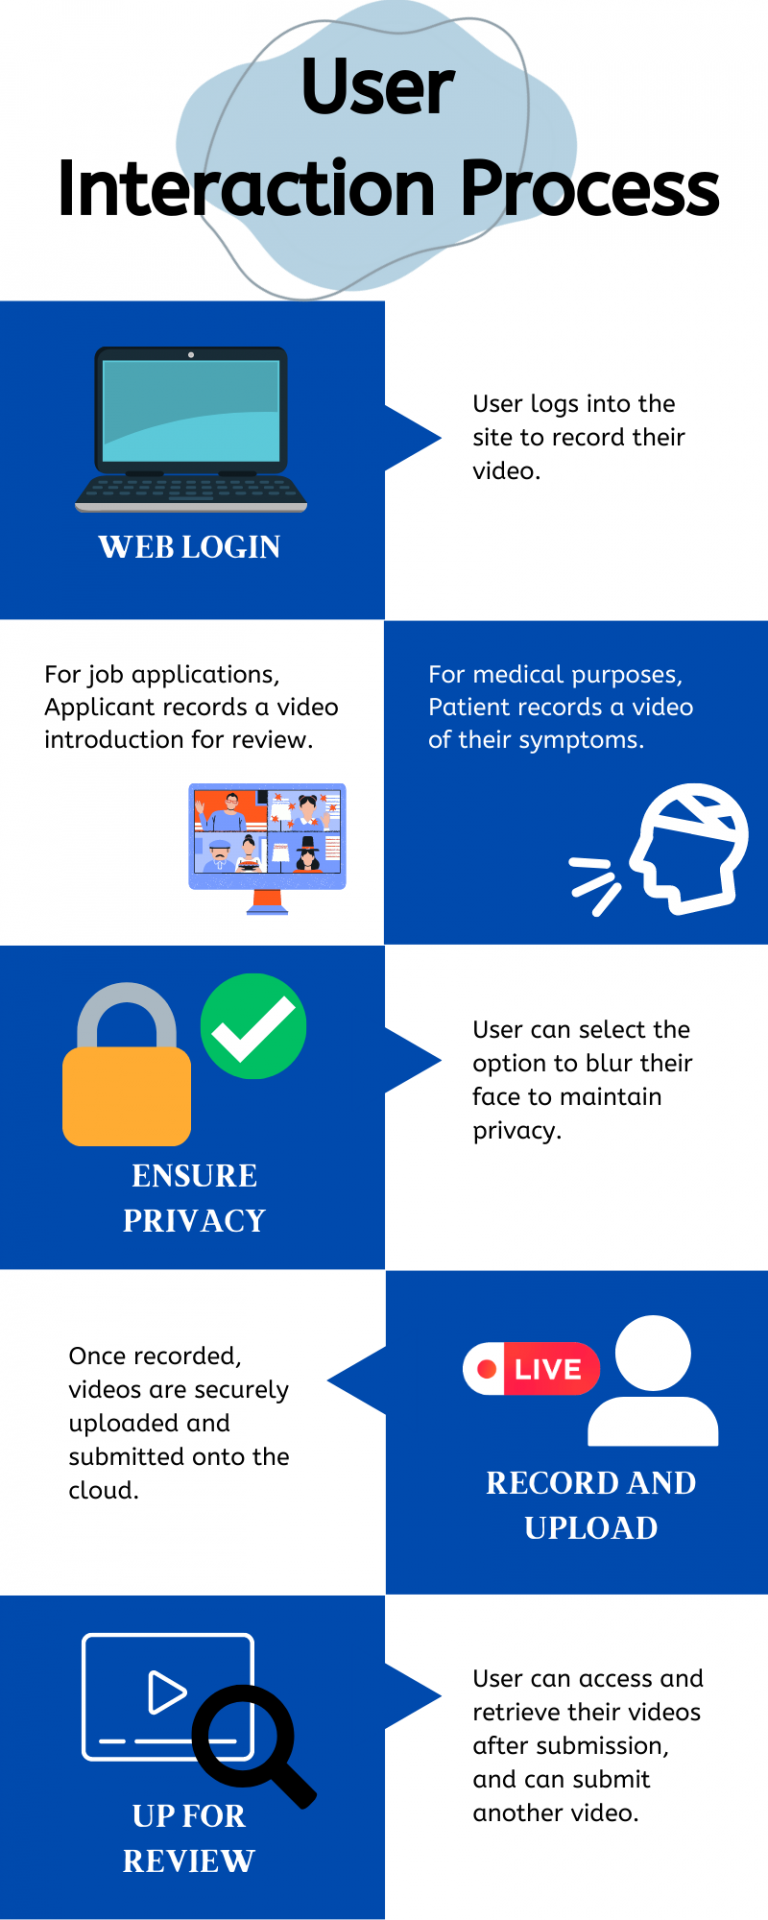 User interaction process infographic. User logs into the site to record their video, choose to select the option to blur their face for privacy, and then they can access and retrieve their videos, or submit another video.